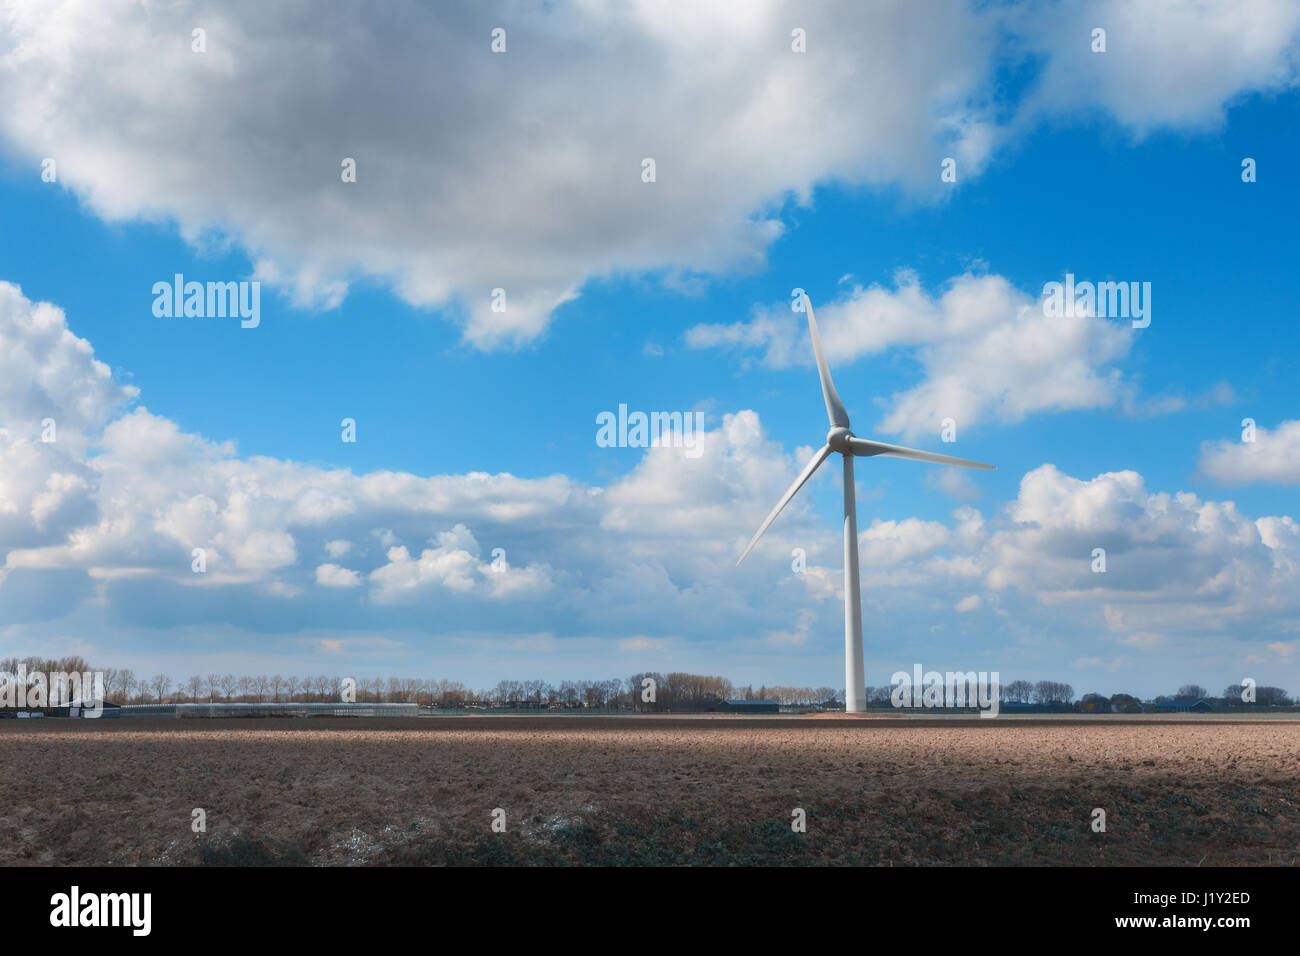 Wind turbines generating electricity. Windmills for electric power production. Landscape with wind mills generating energy on the field Stock Photo